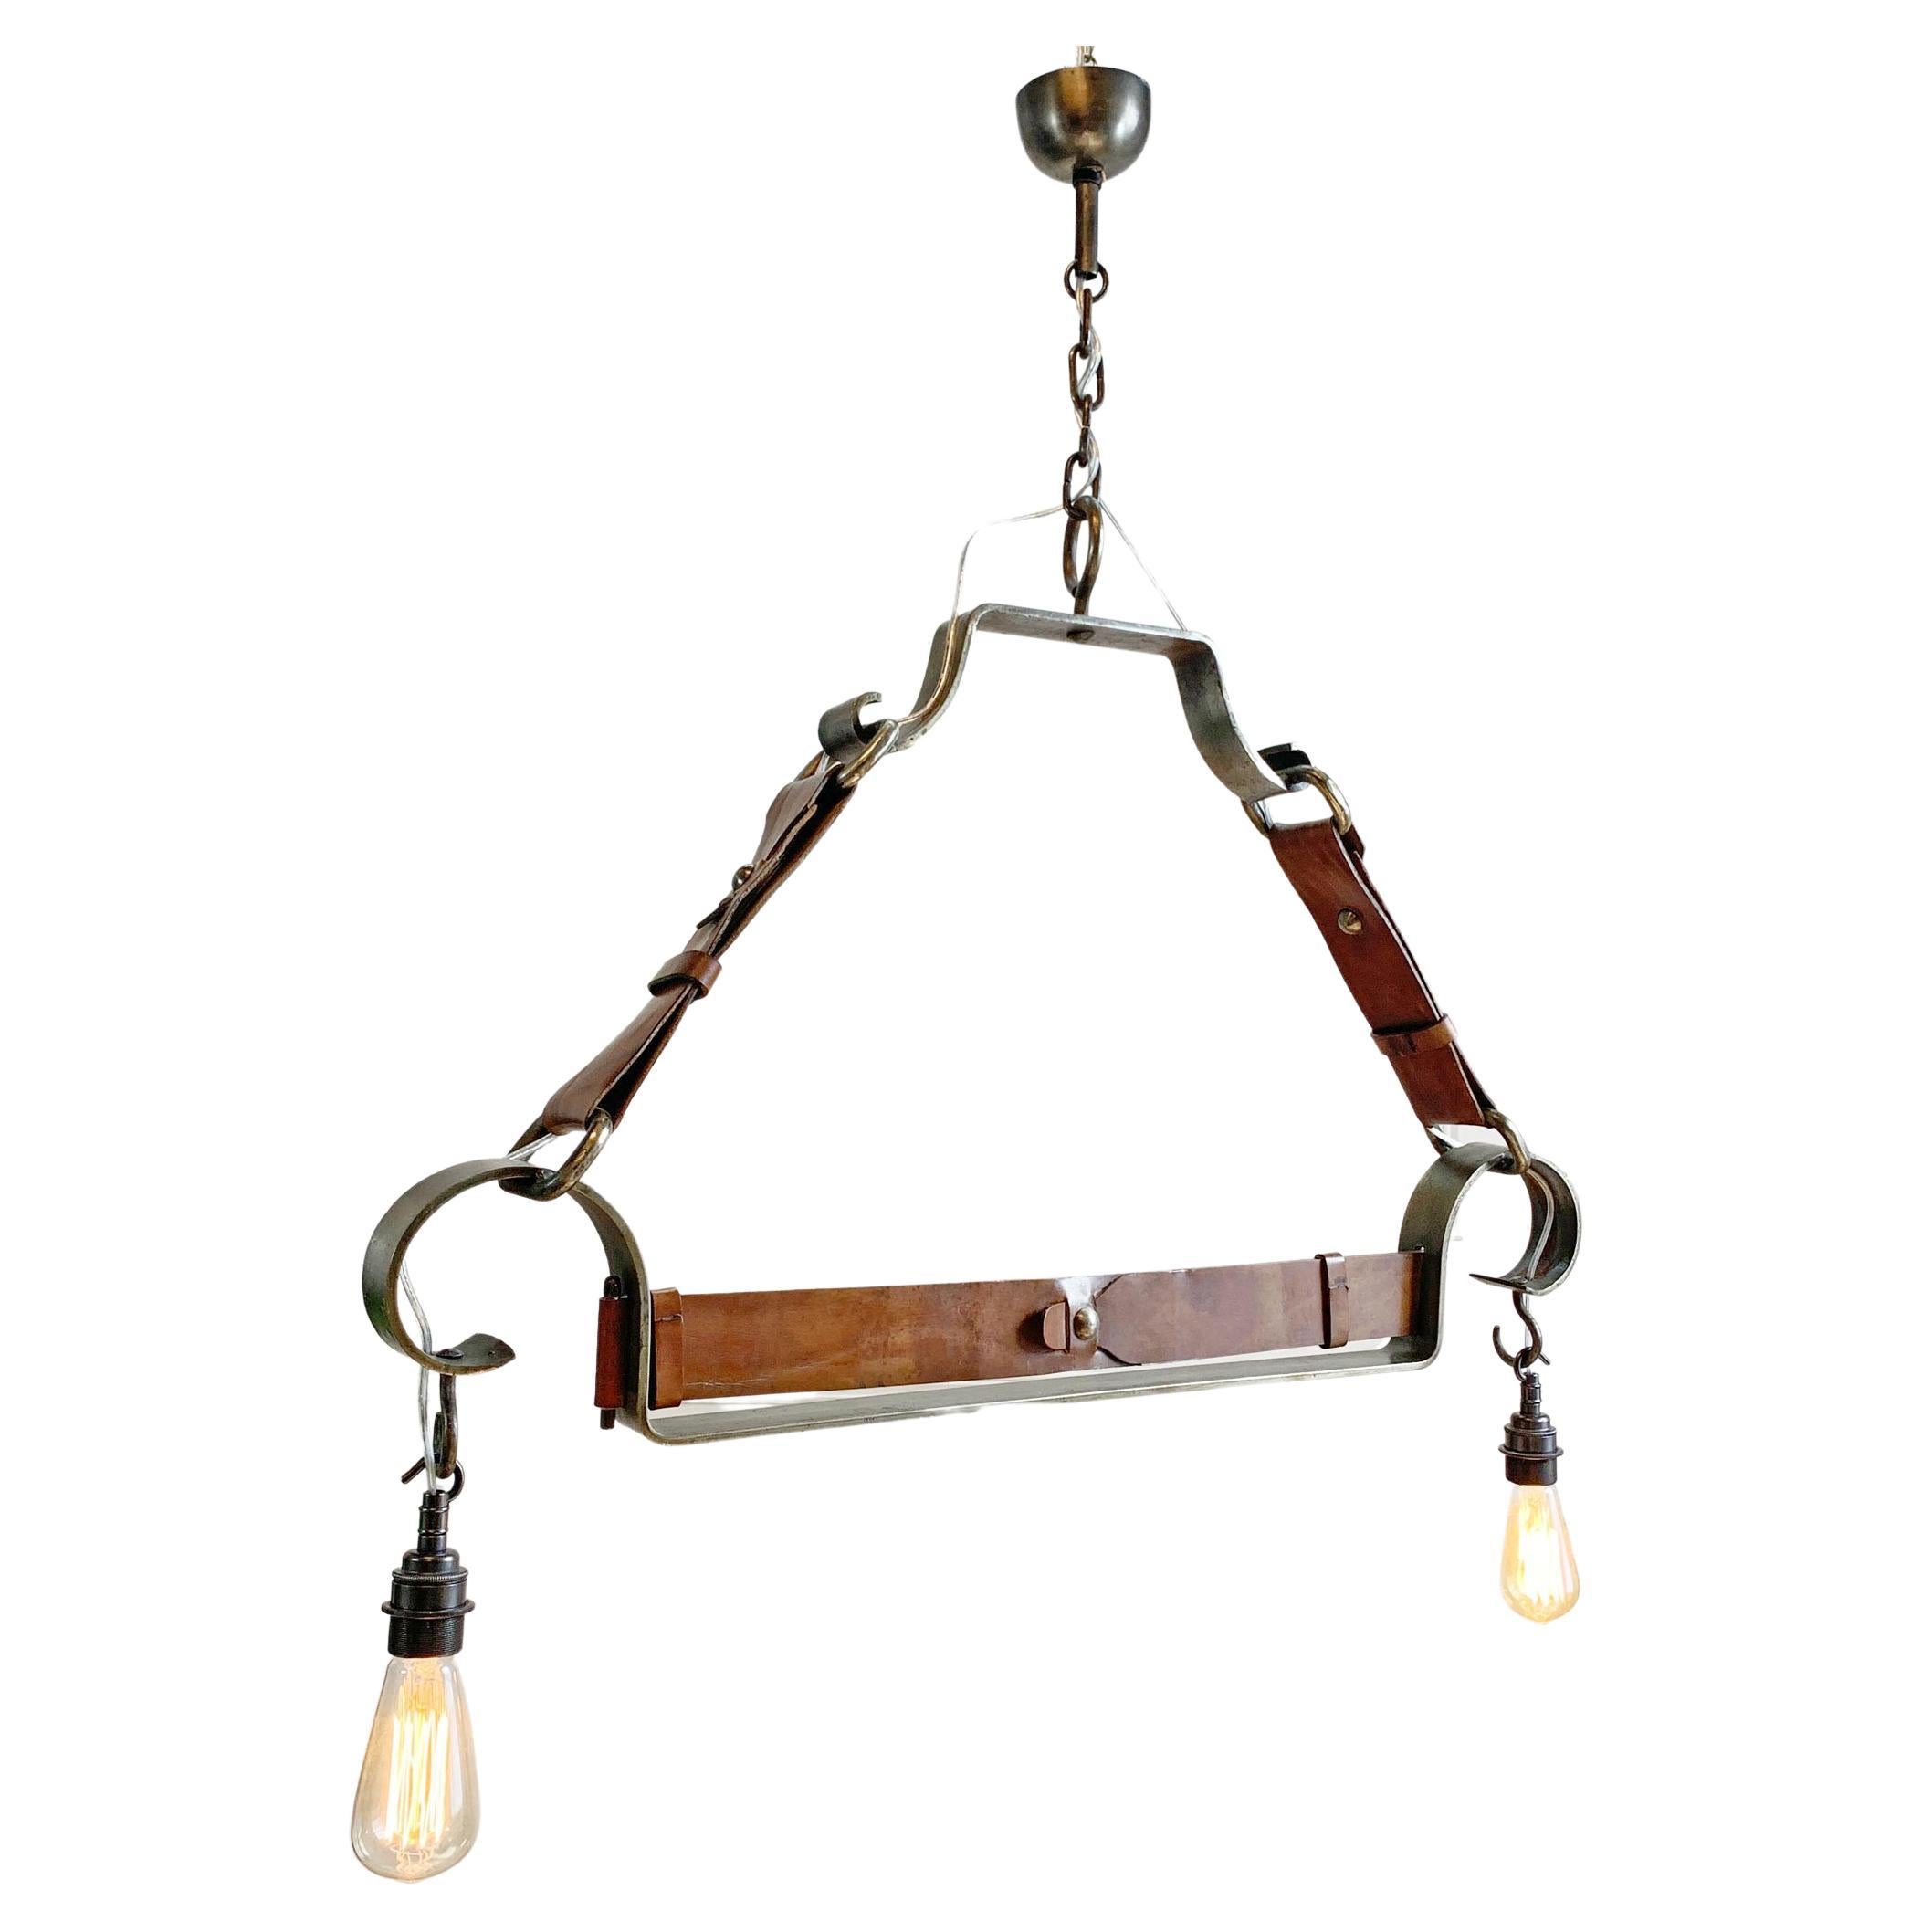 Jean-Pierre Ryckaert Tan Leather Strap and Steel Ceiling Pendant Light For Sale